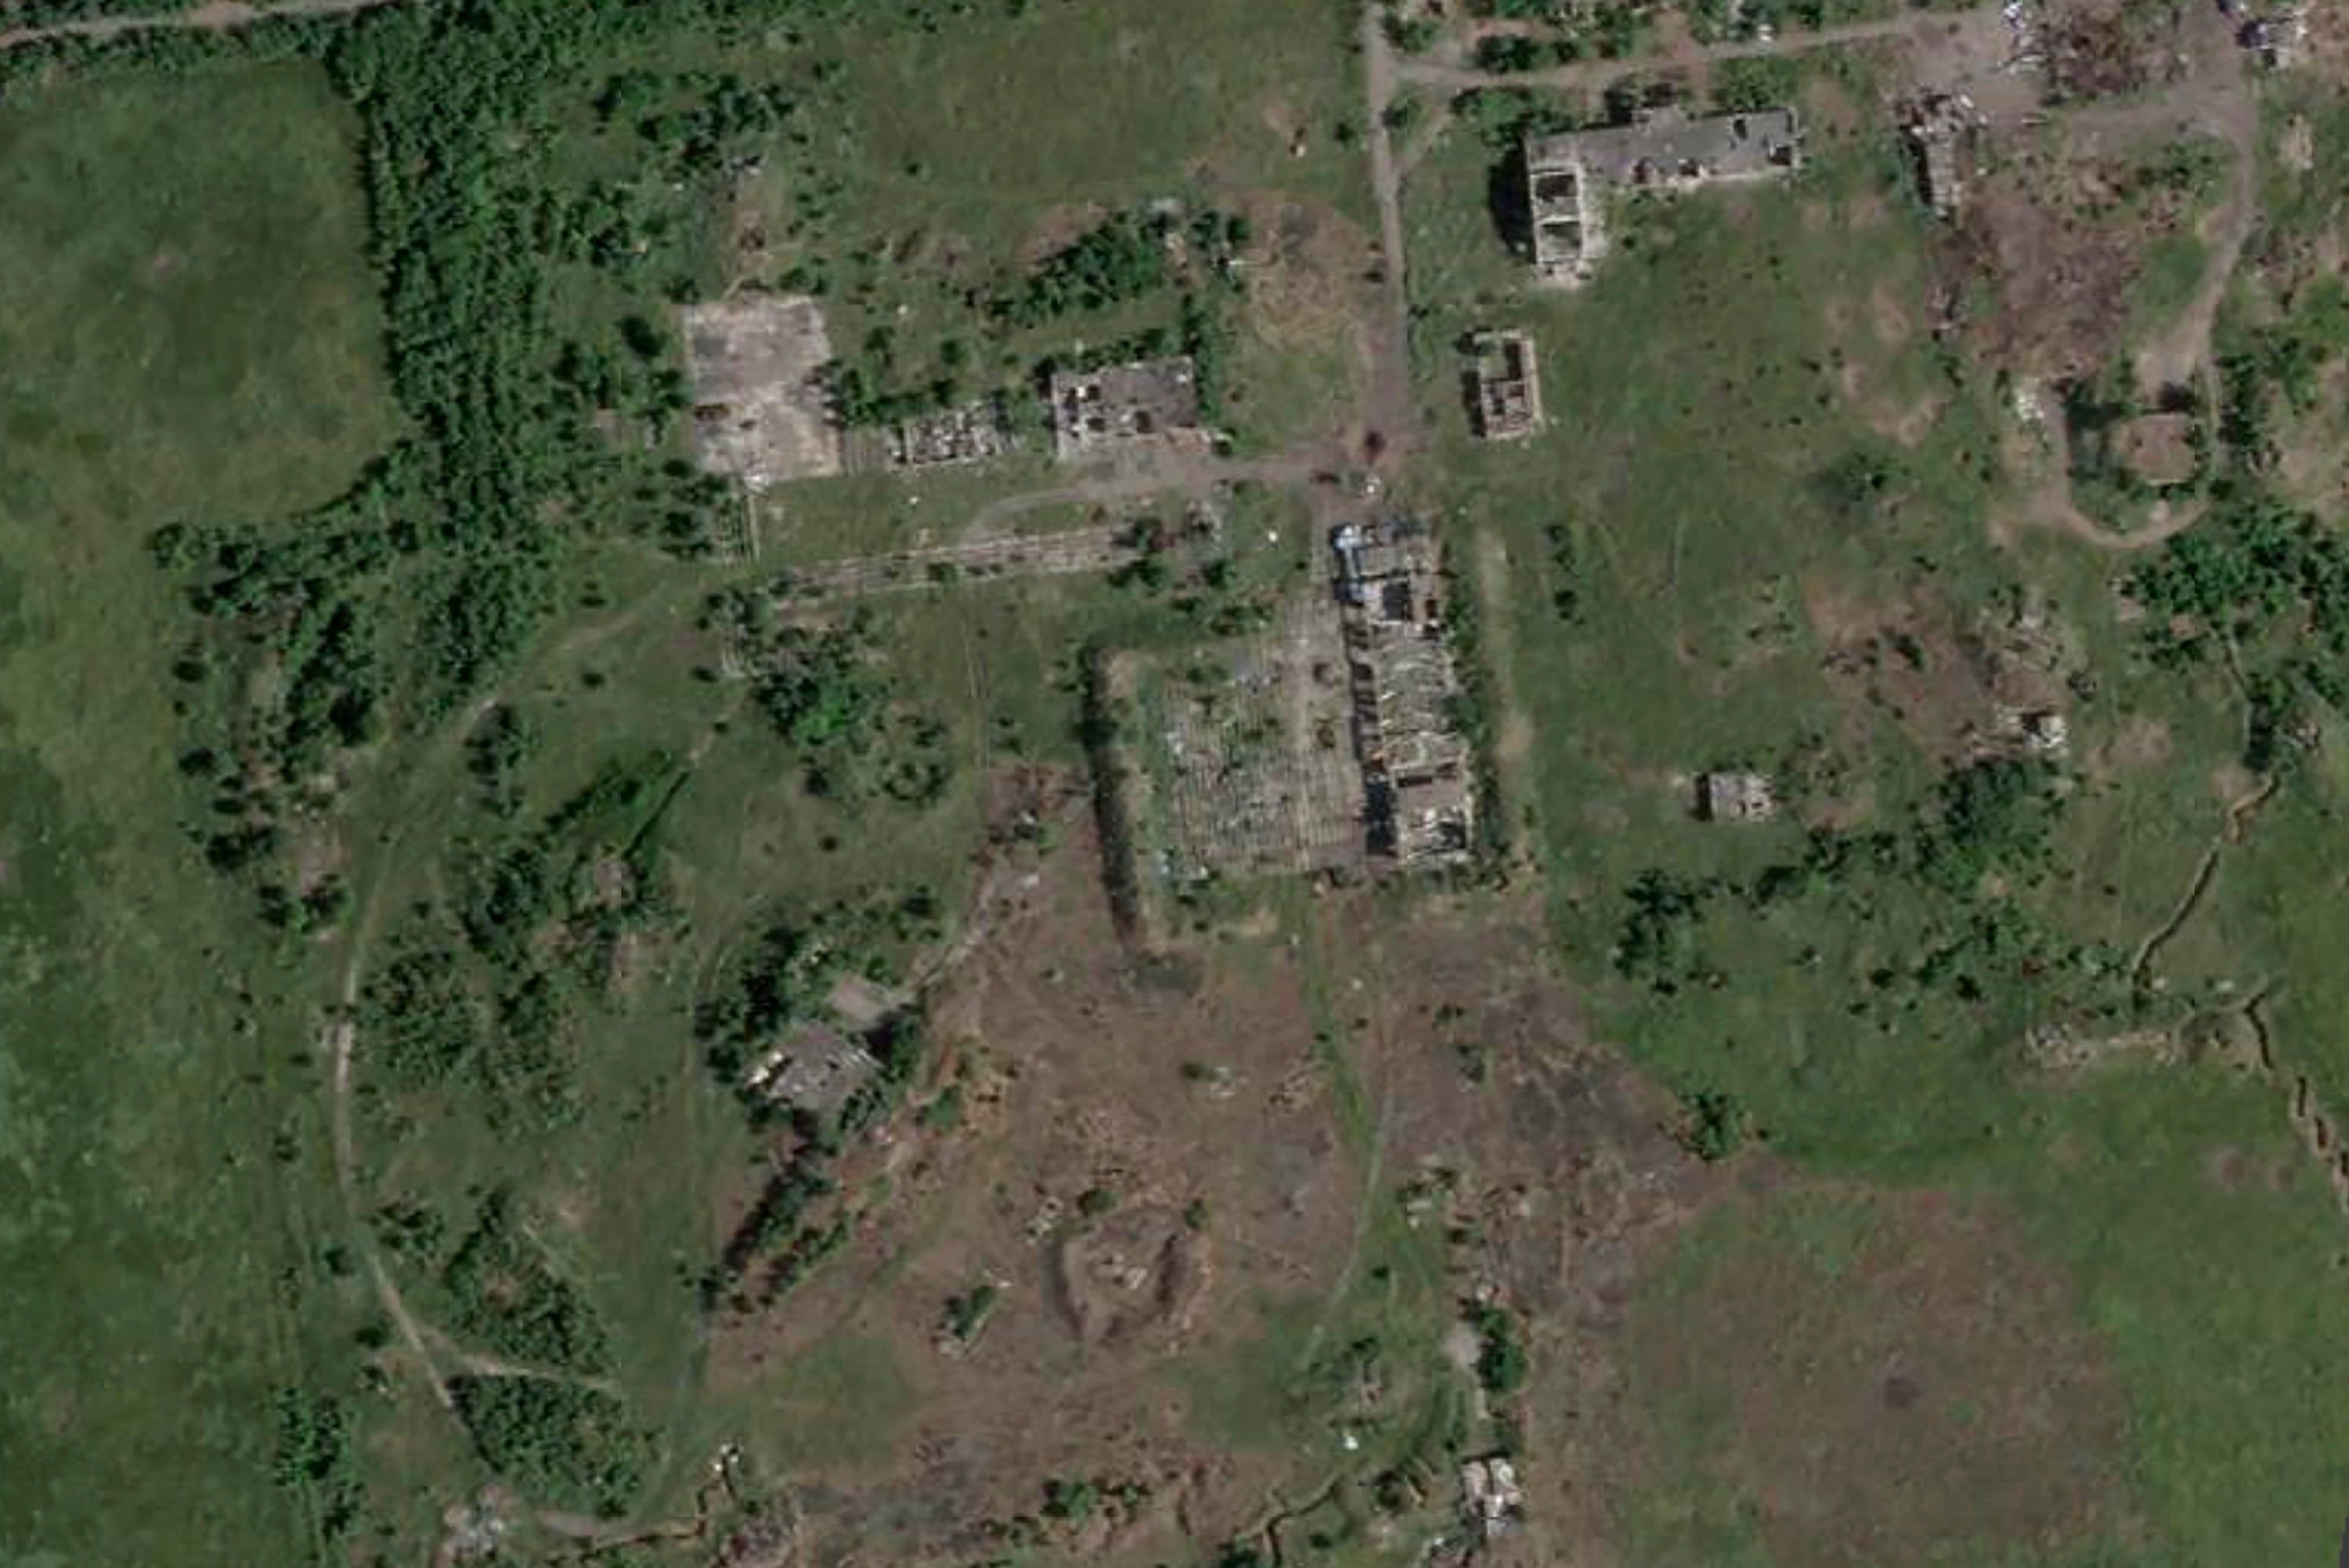 This satellite image shows a position in Avdiivka from July 2022